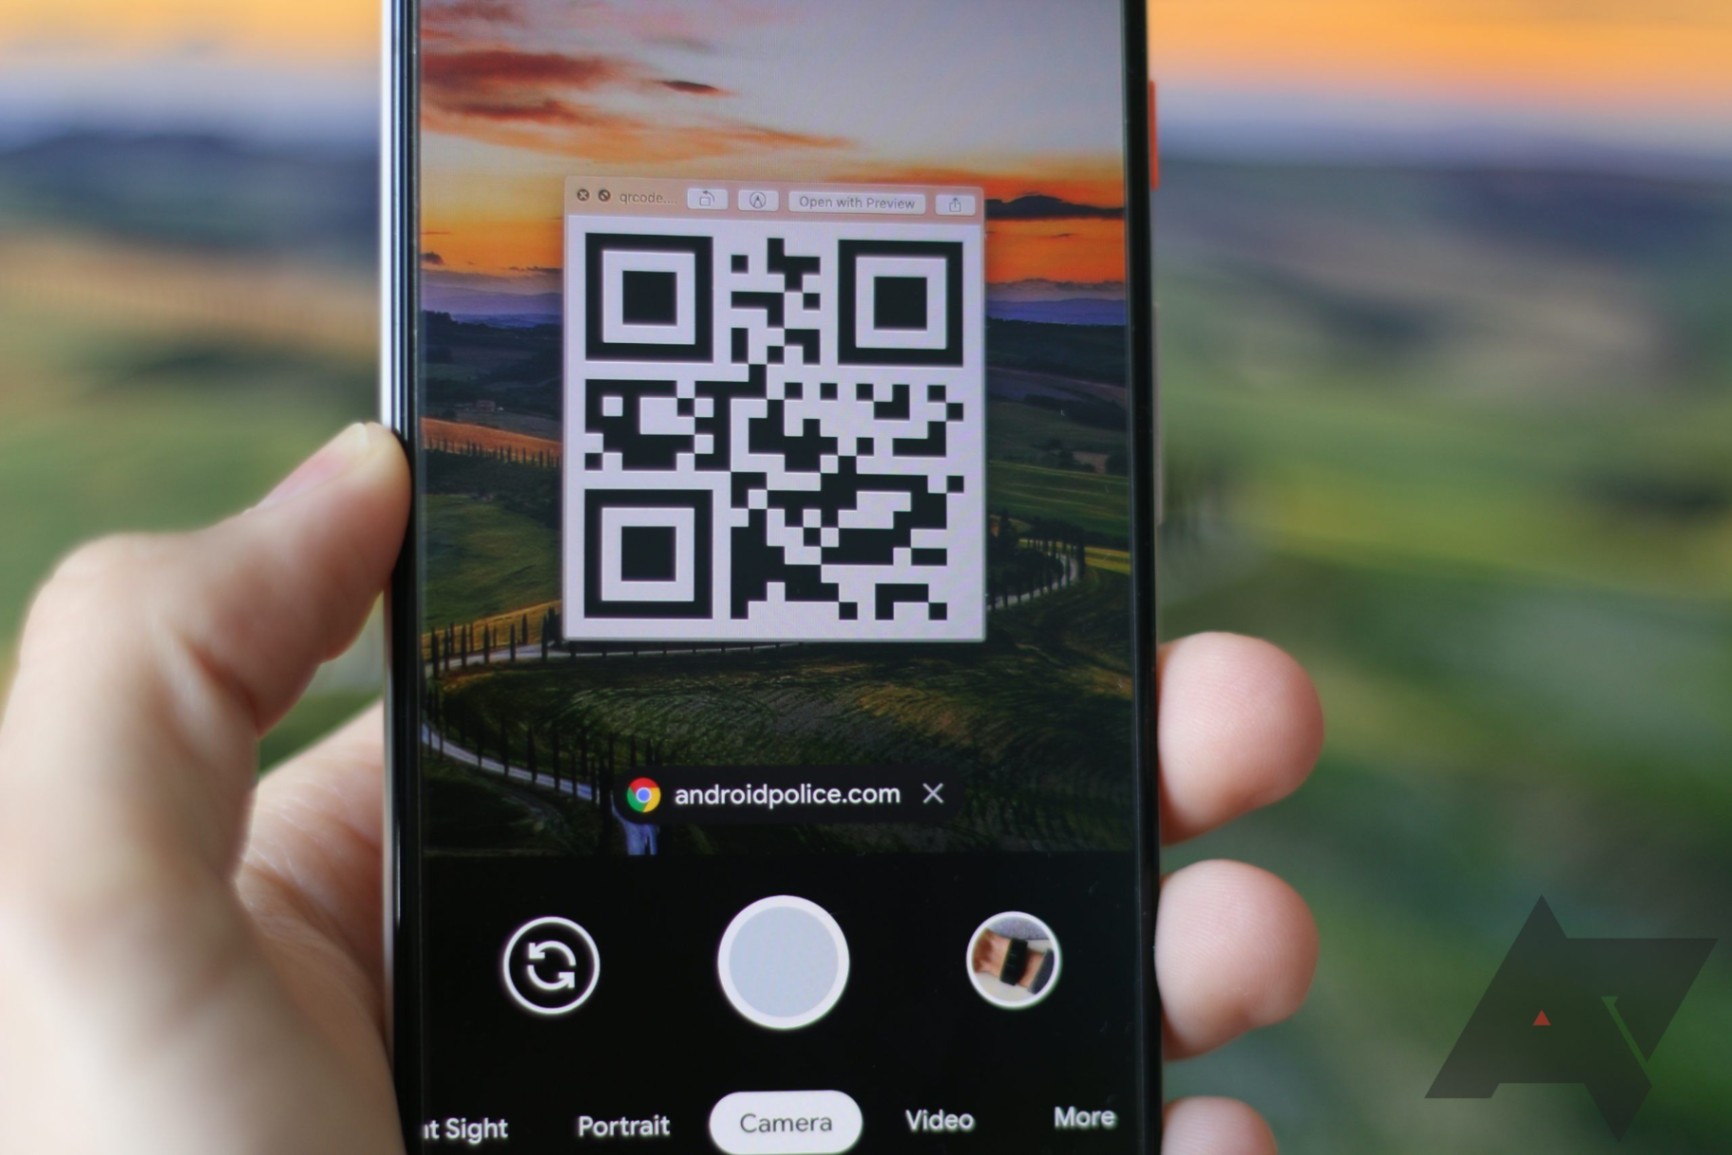 How to Share Wi-Fi via QR Code from Android Devices